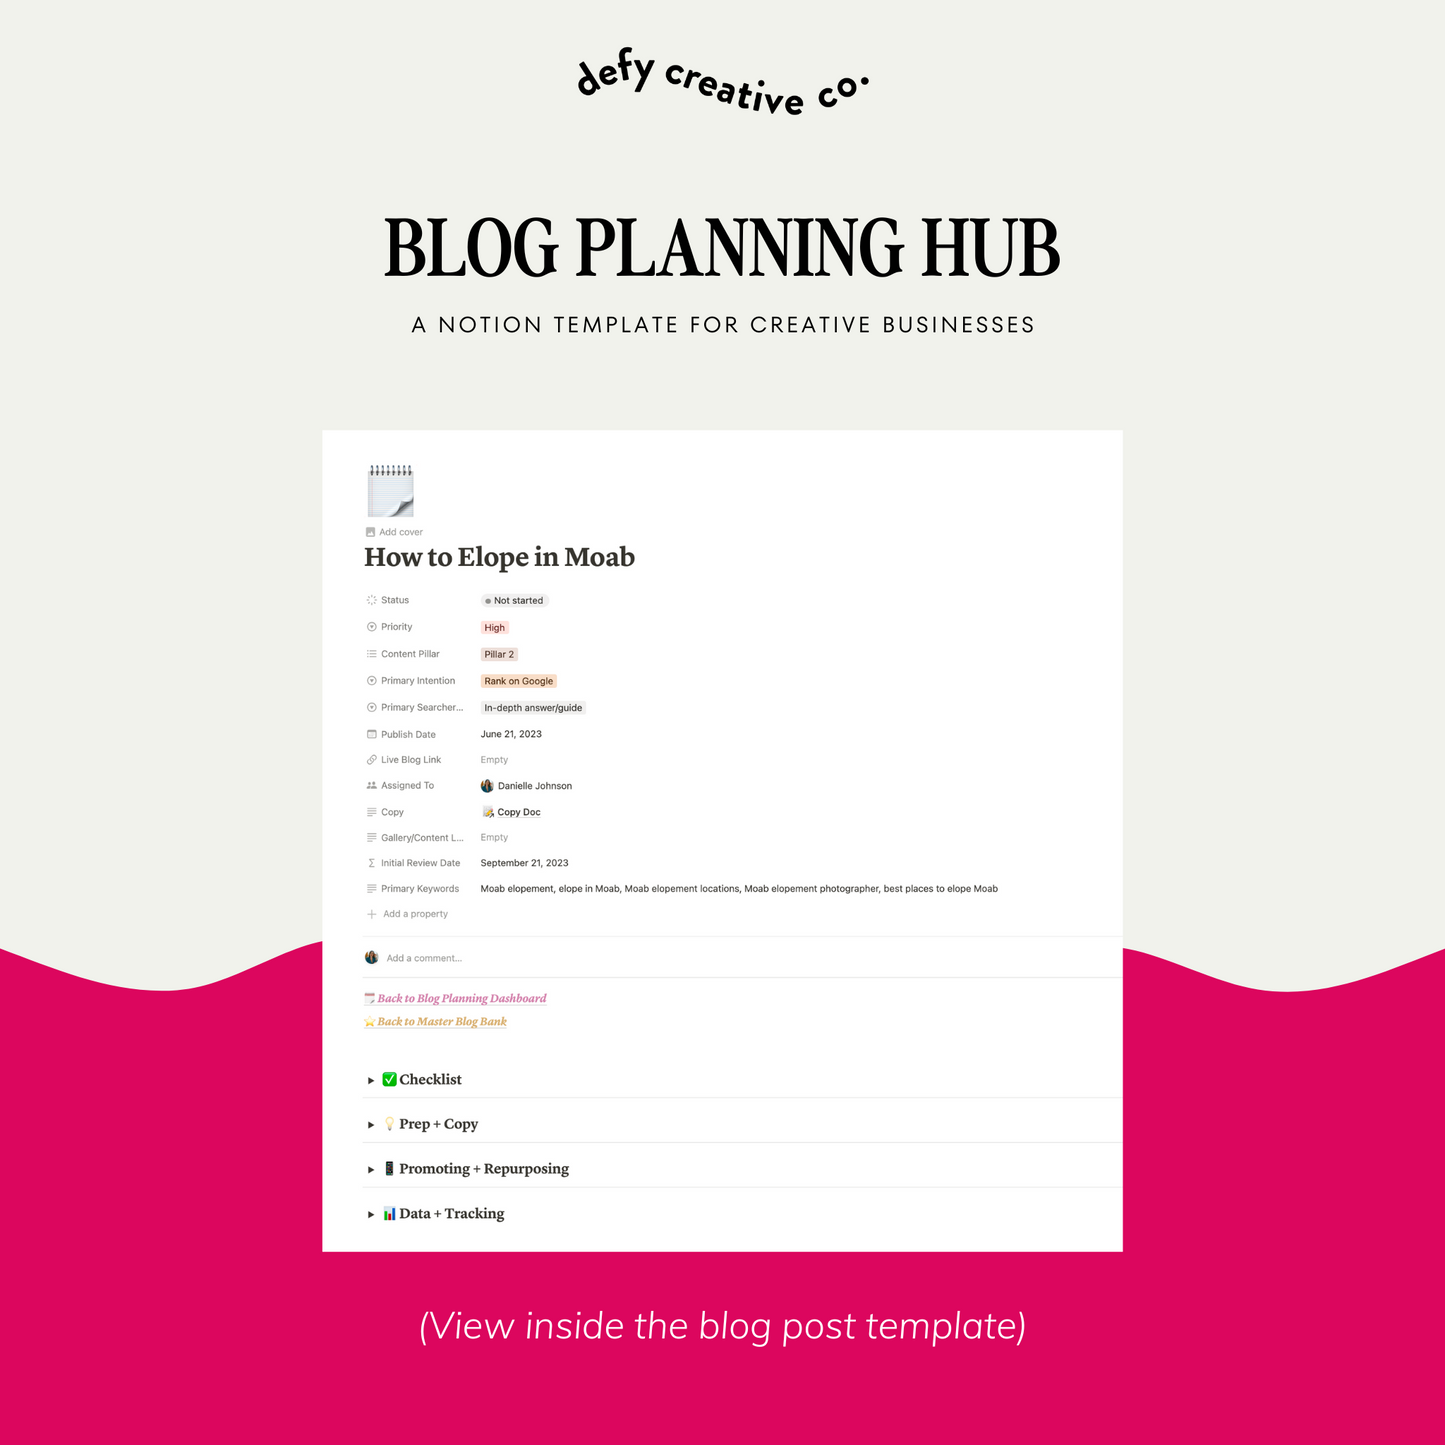 The Blog Planning Hub: Notion Template